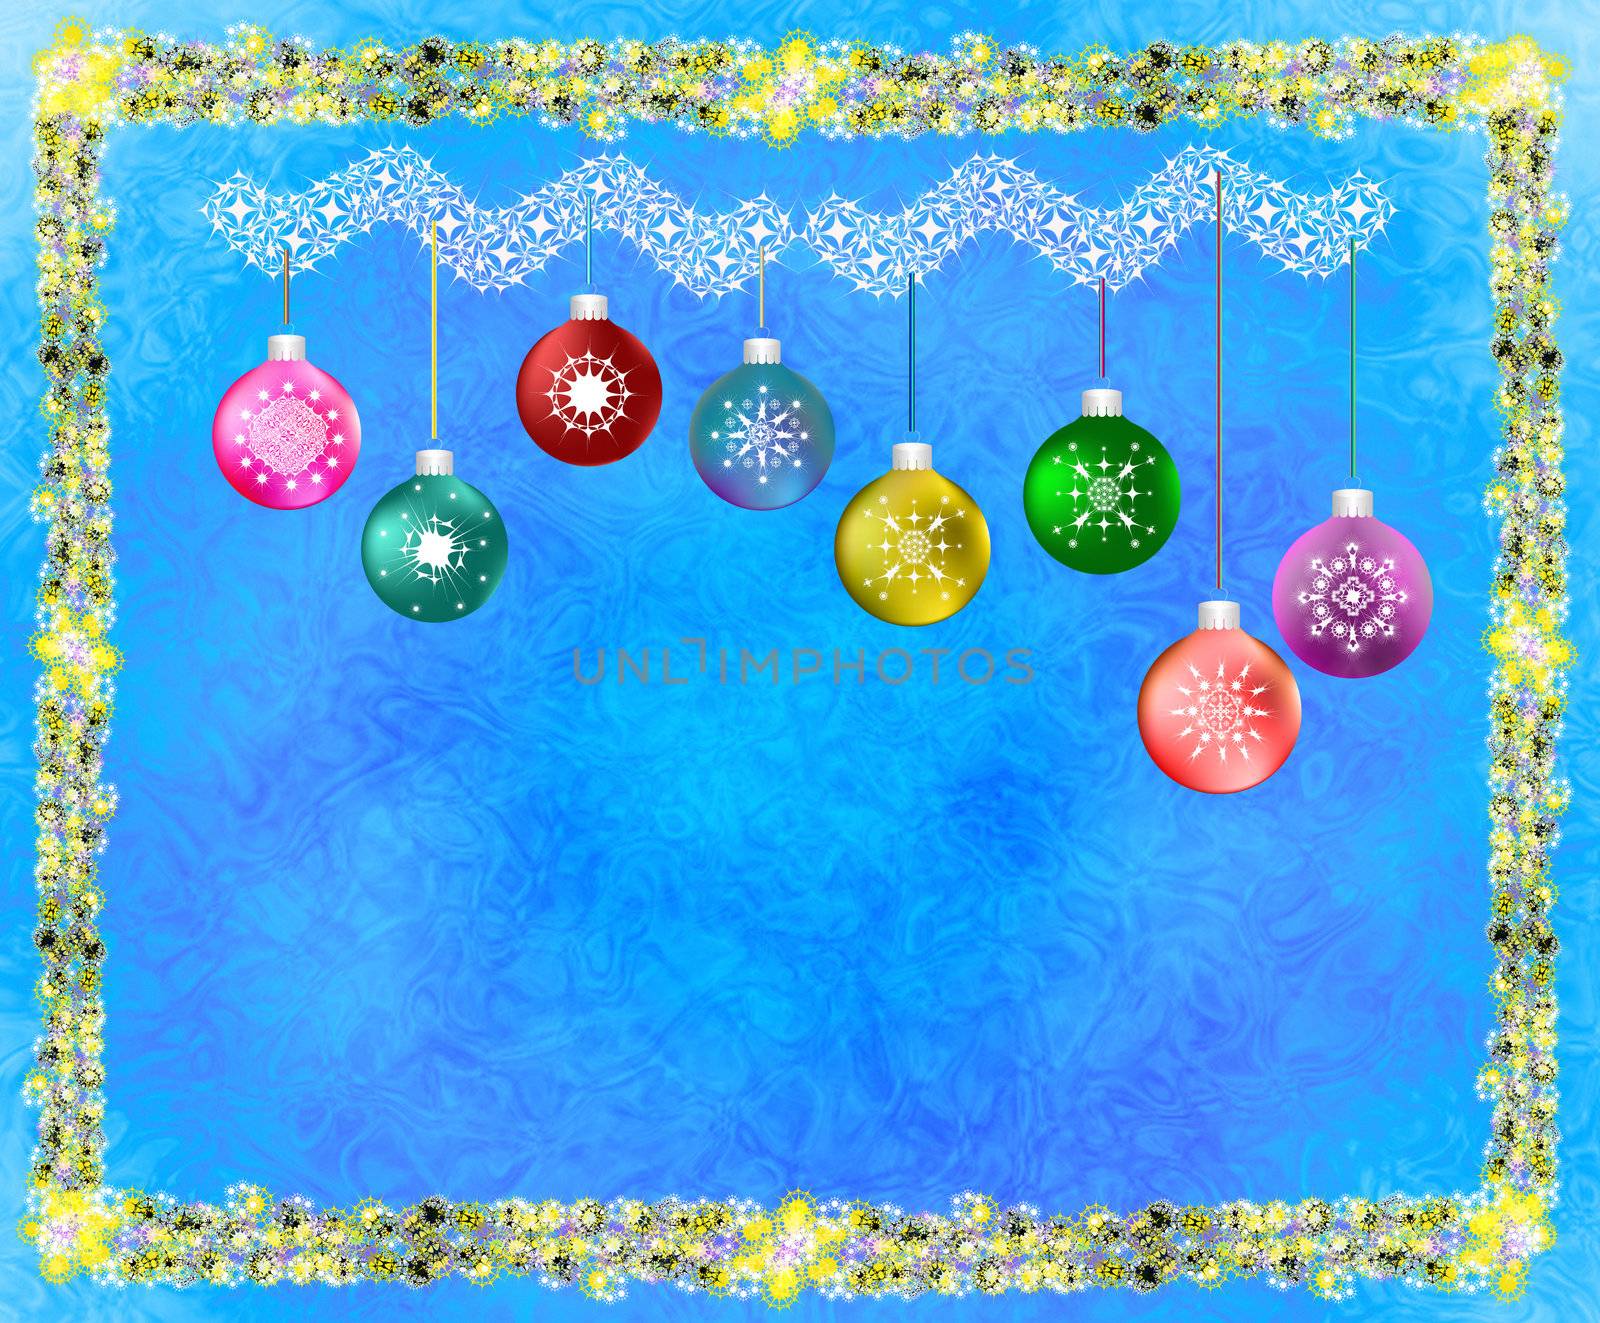 New Year's and Christmas celebratory card on an abstract background